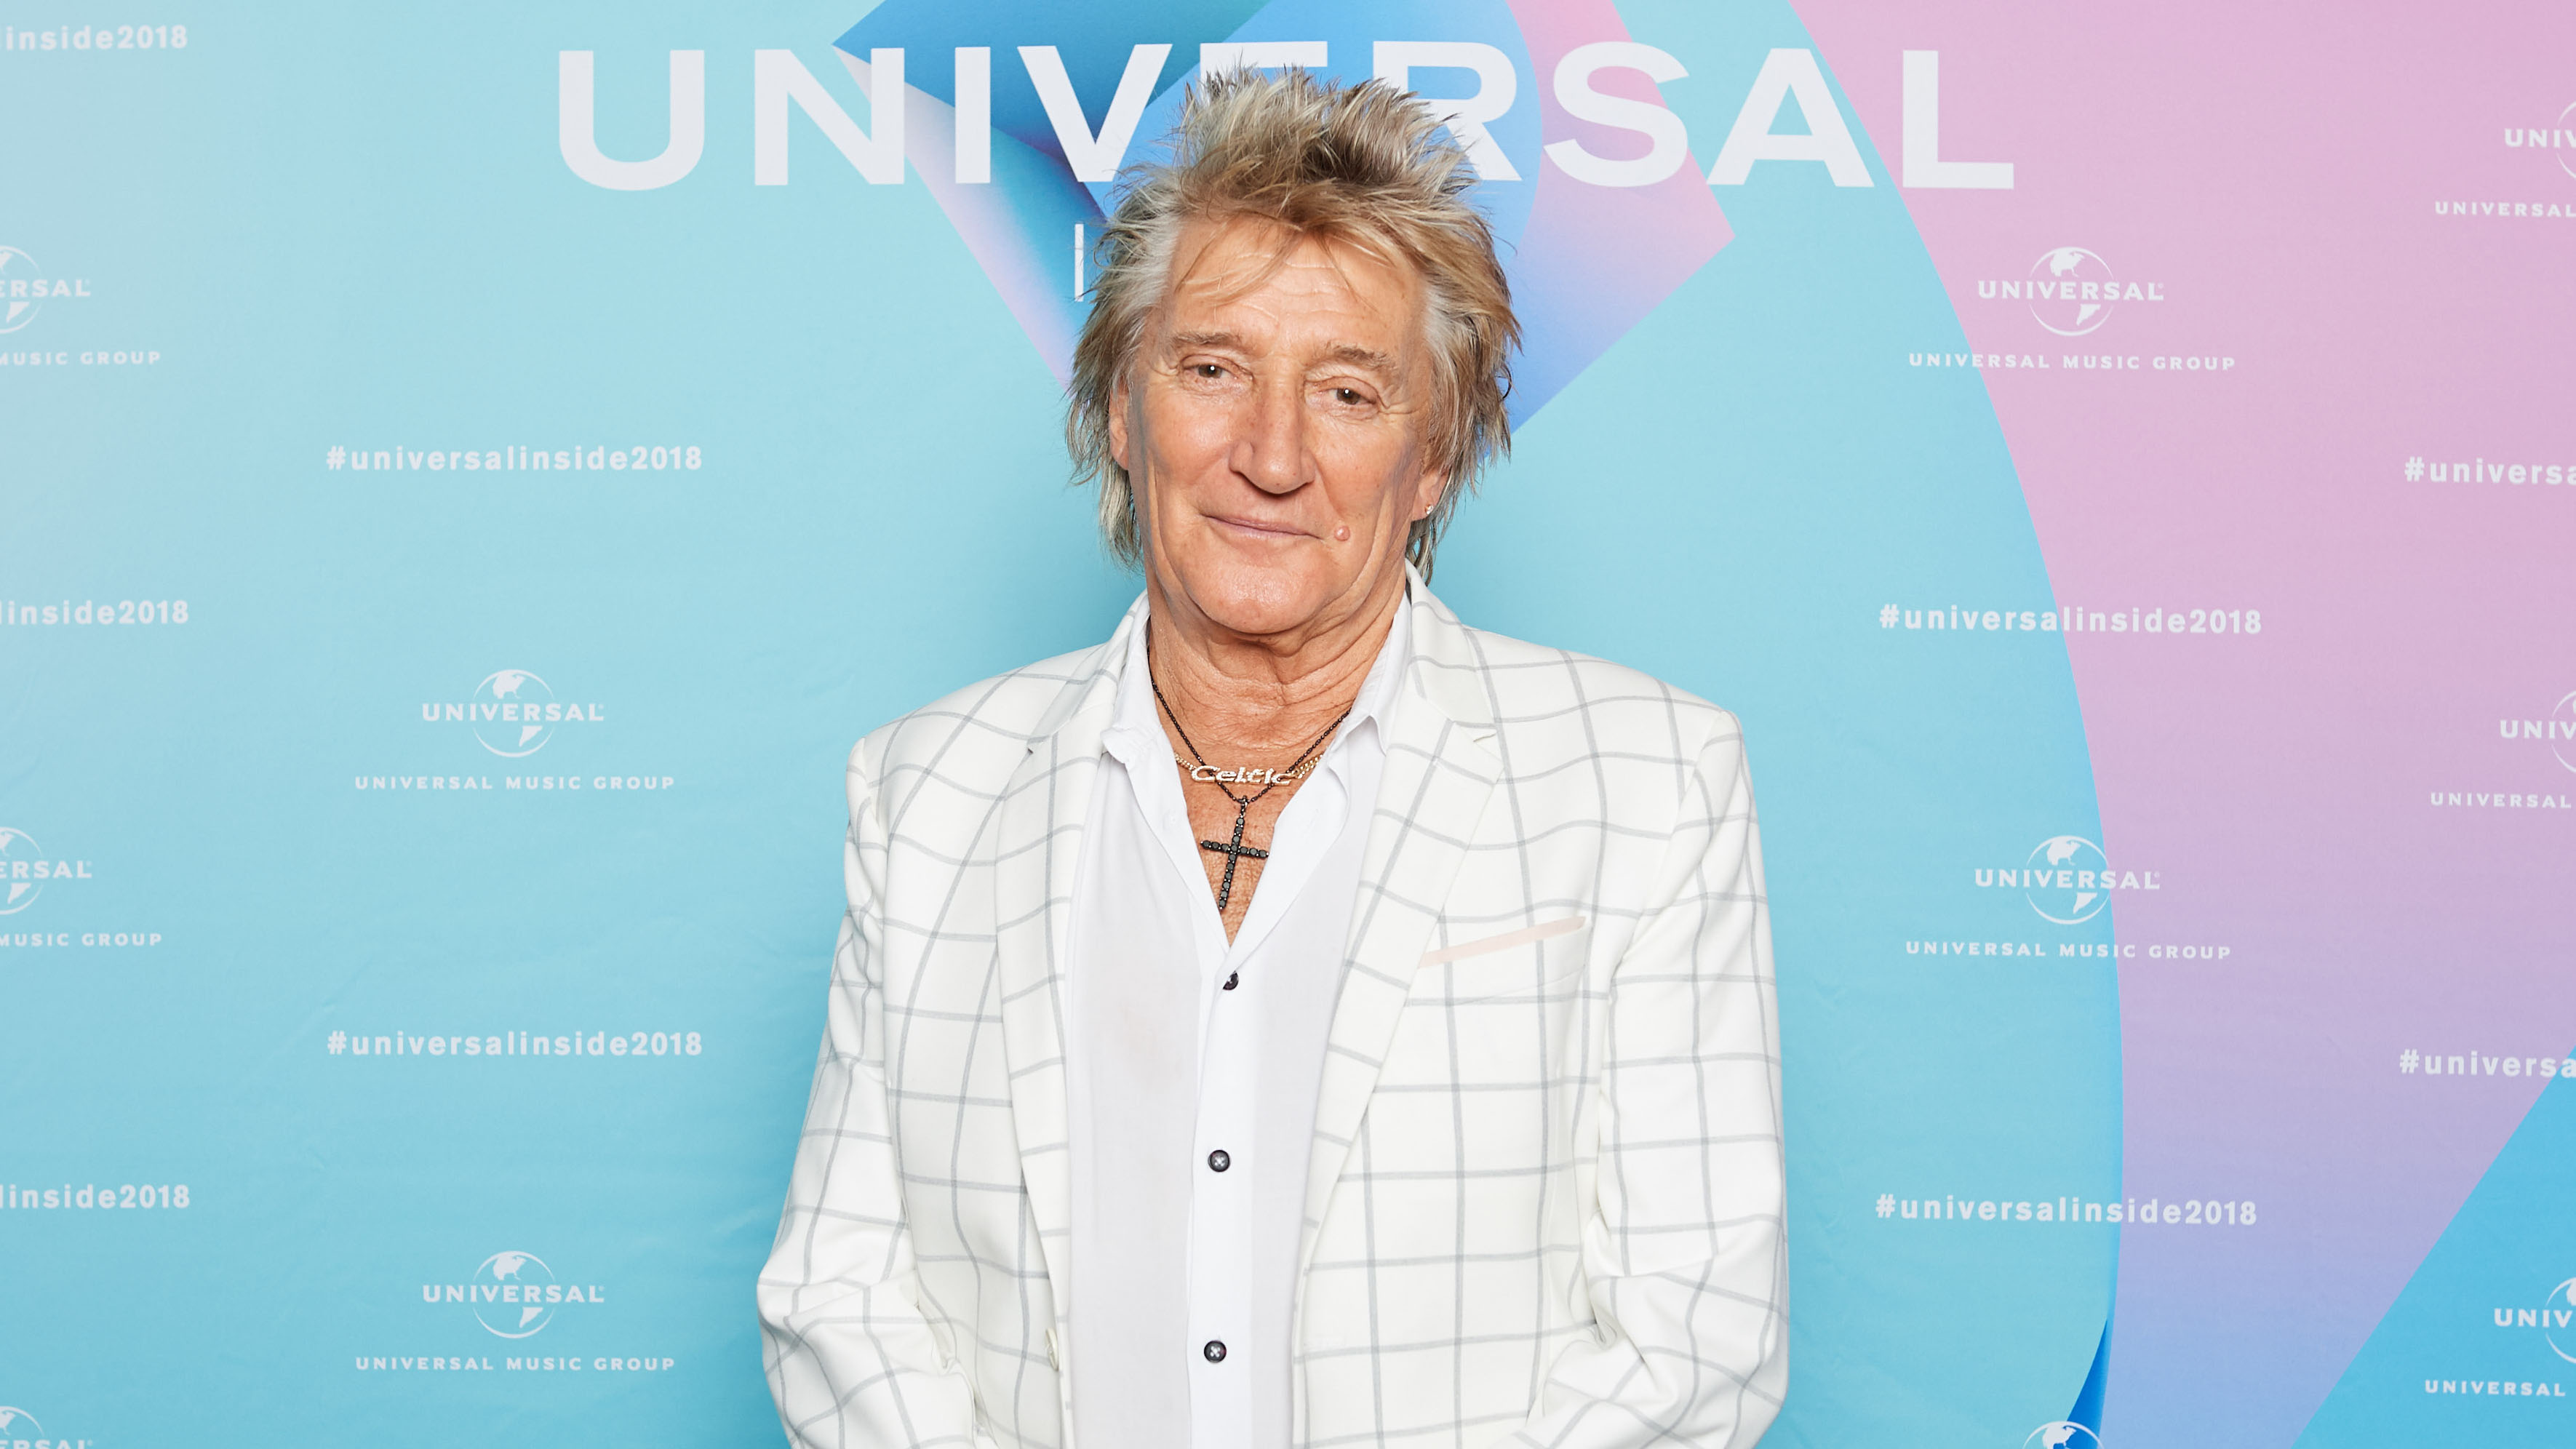 Rod Stewart's 'worried' kids want singer to 'retire' after health issues